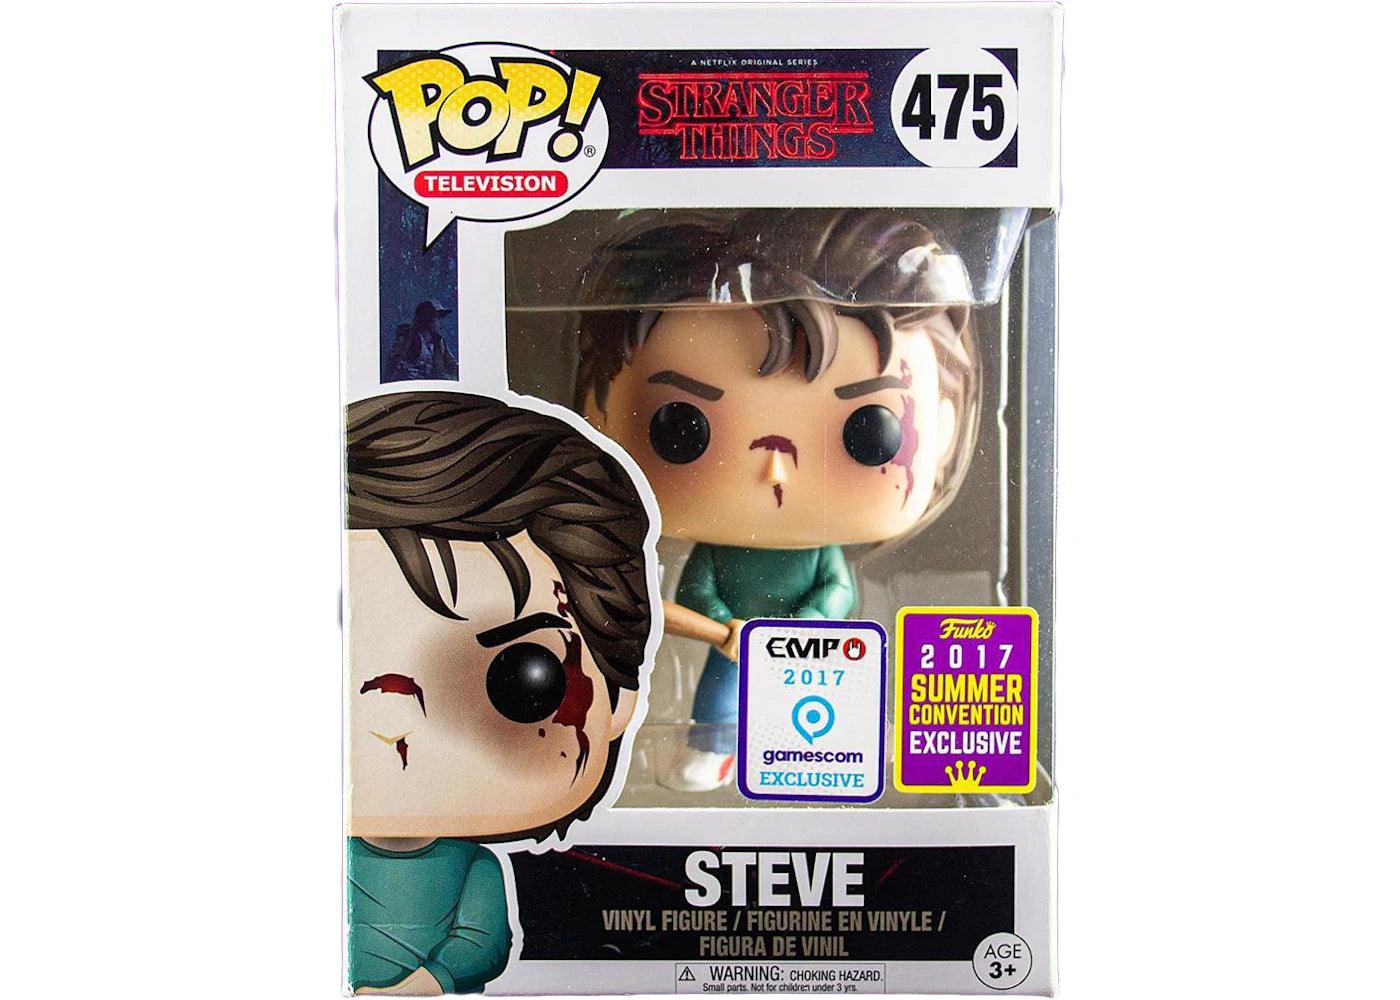 Stranger Things: Funko Pop! Television - Steve #475 2017 Summer Convention Exclusive EMP 2017 - Magic Dreams Store